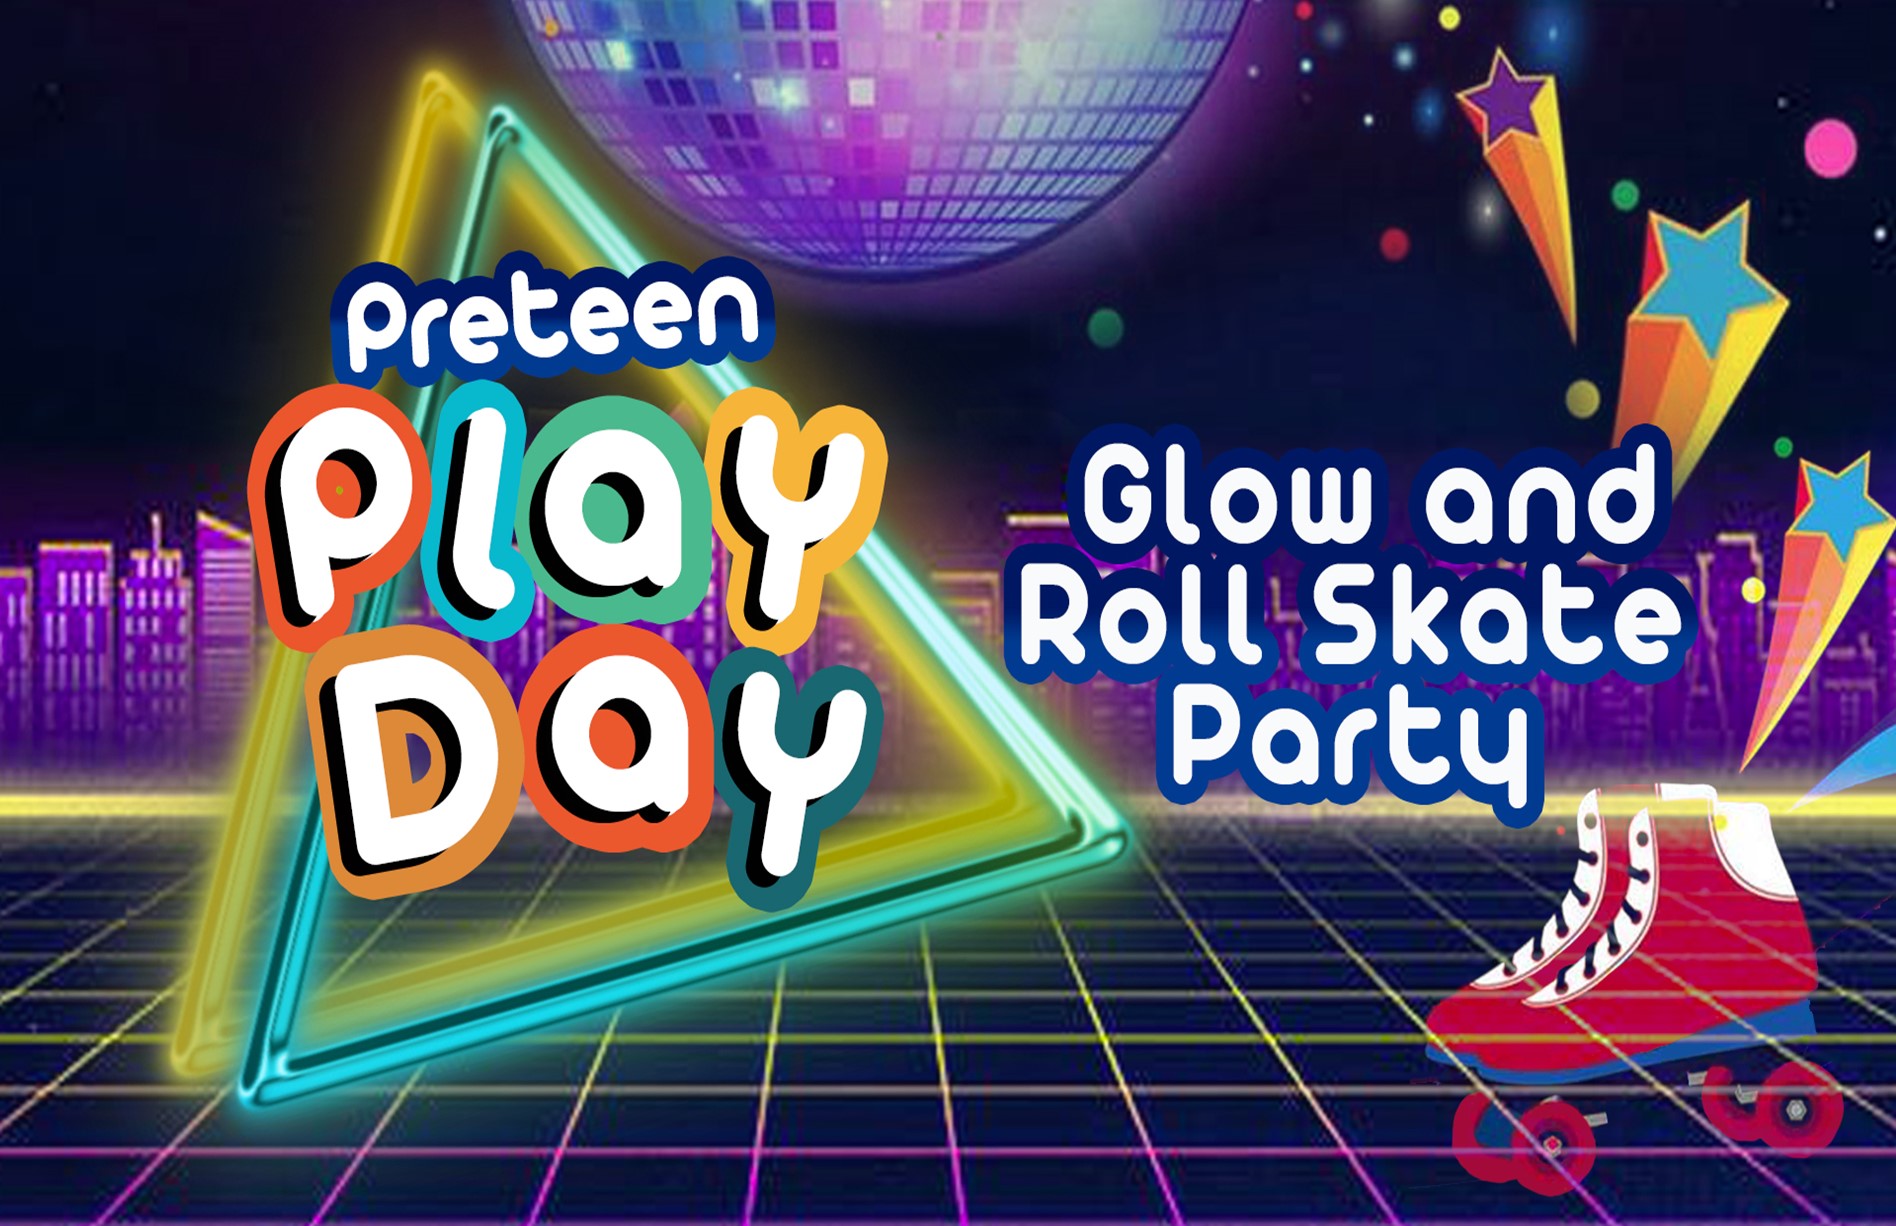 Preteen Play Day - Glow & Roll Skate Party